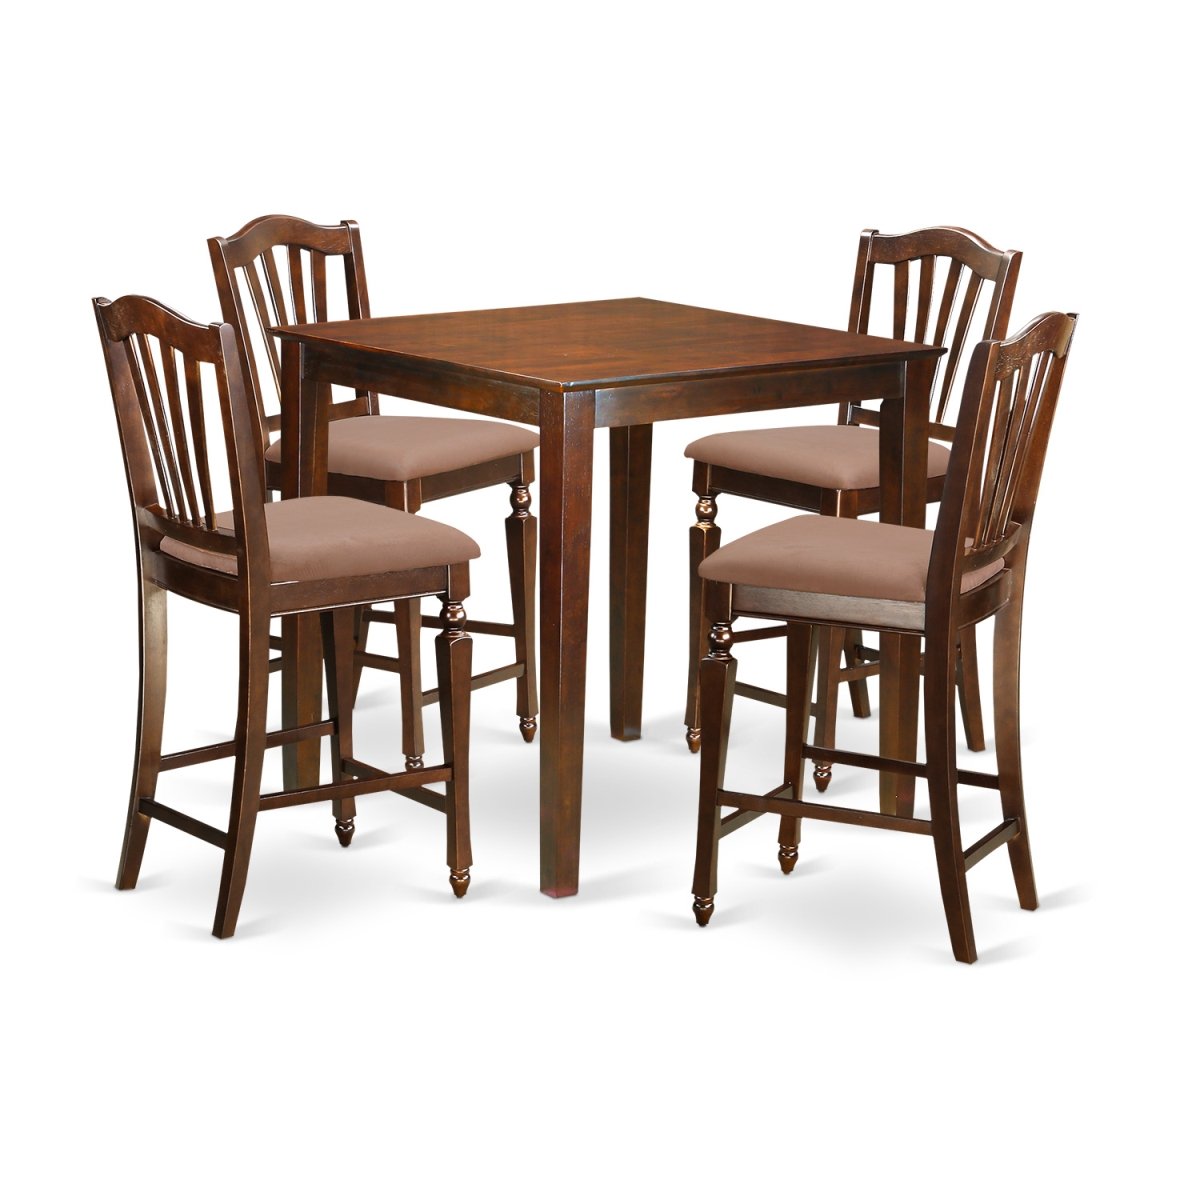 Counter Height Pub Table & 4 Kitchen Chairs, Mahogany